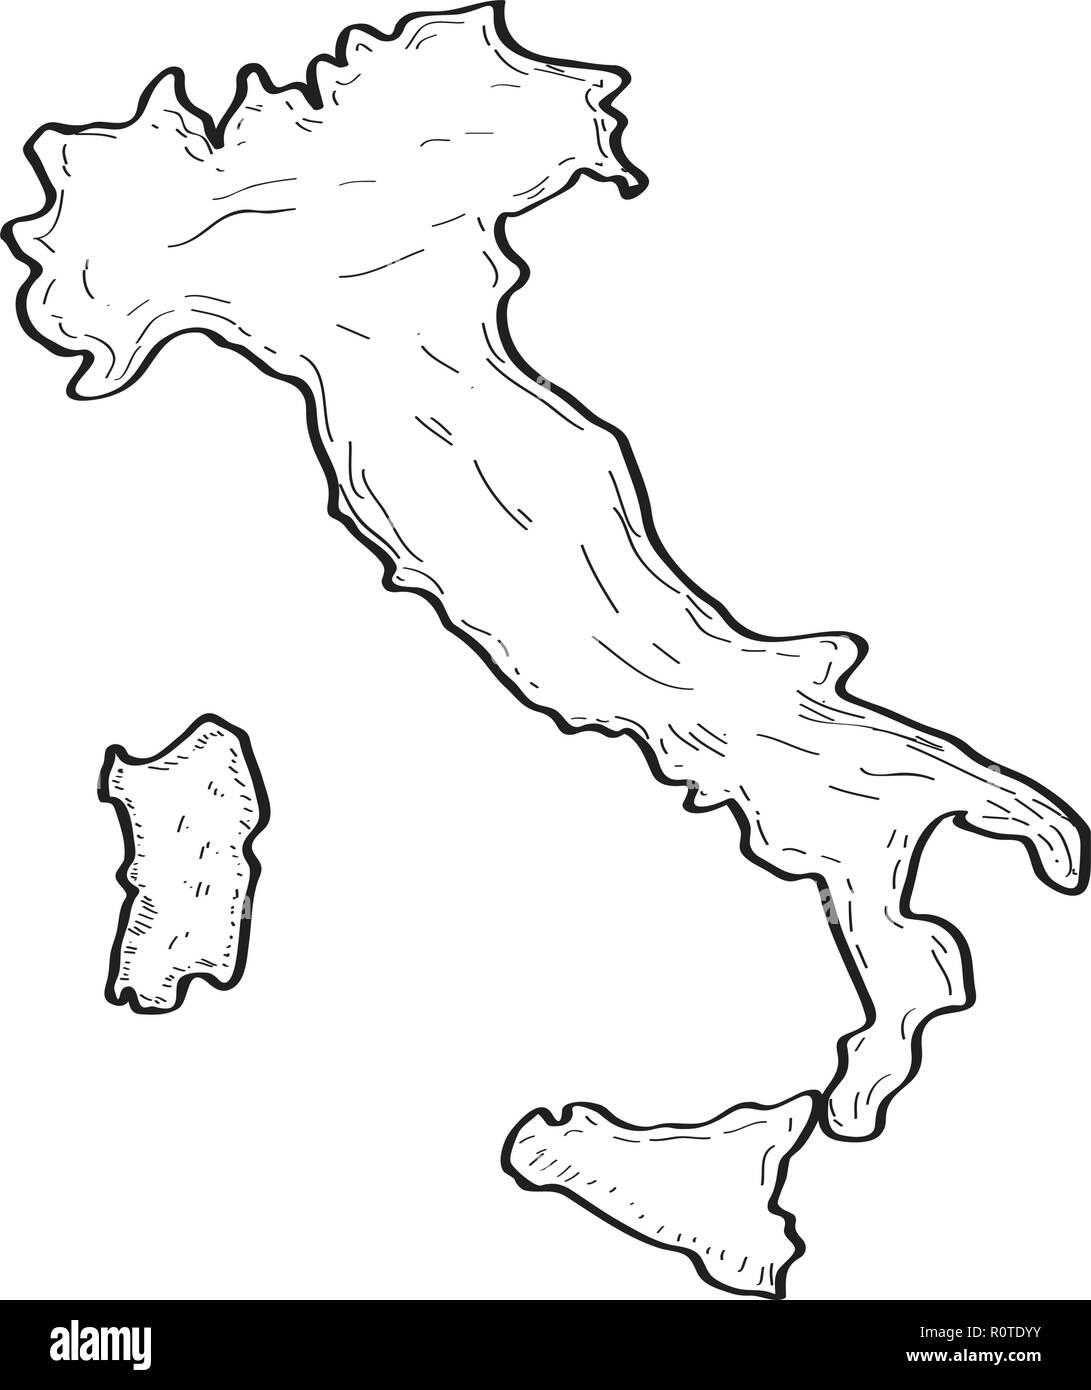 Italy italian country map outline Stock Vector Images - Page 2 - Alamy